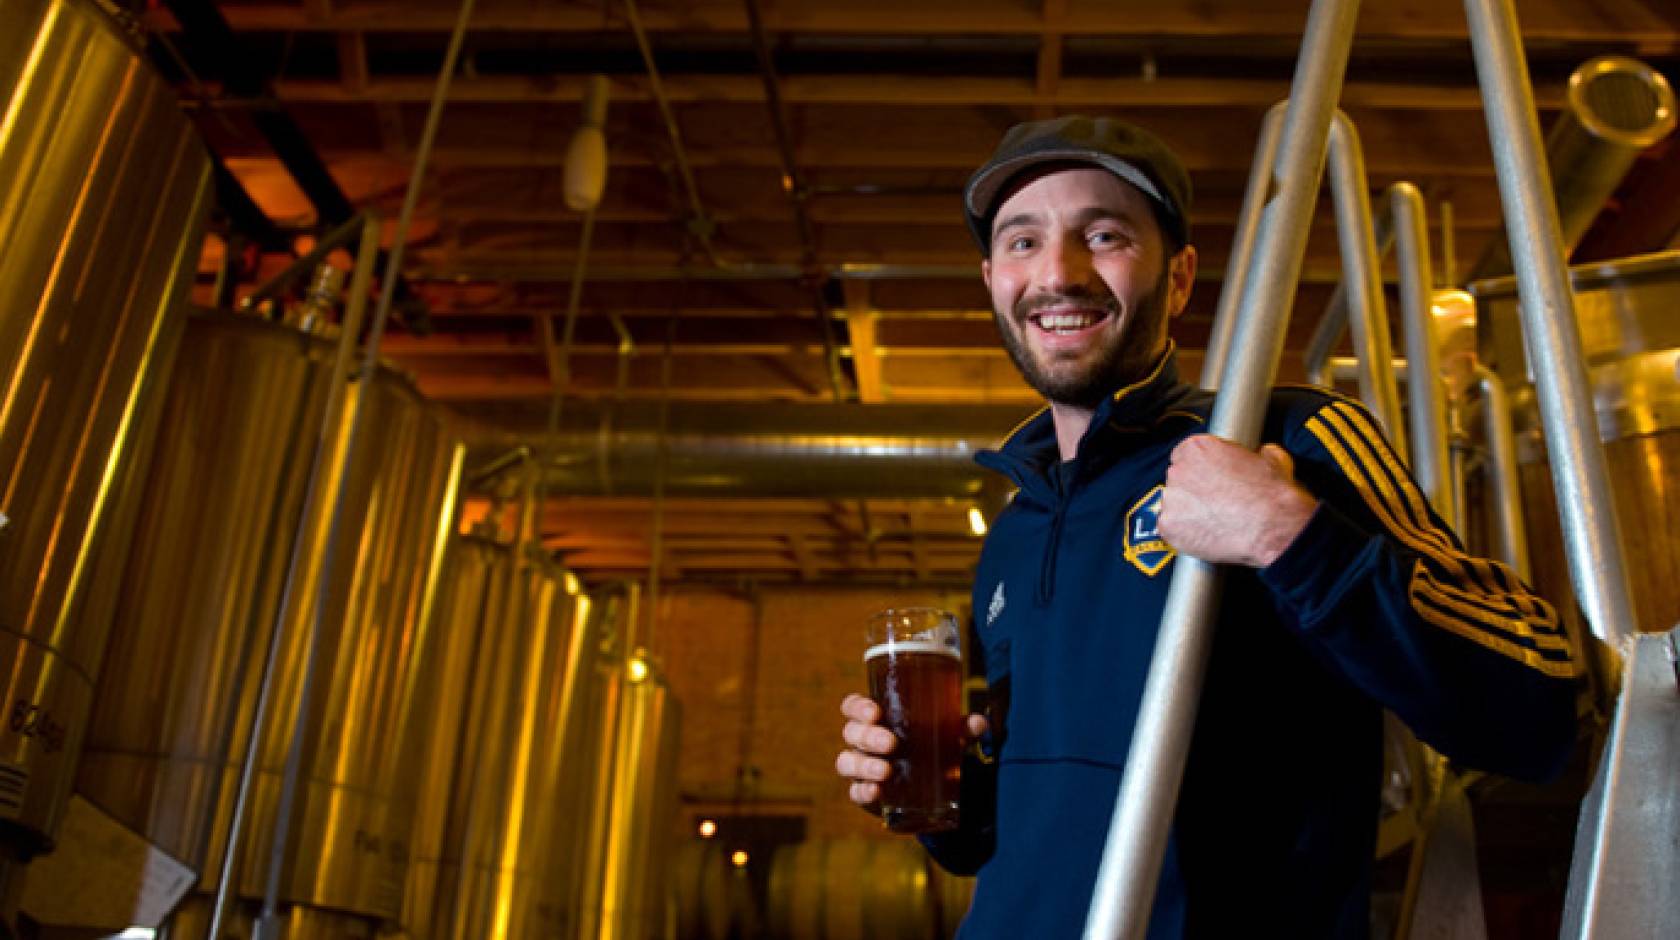 “I wanted to open an interesting place where people want to be,” says 2008 UC Irvine graduate Brandon Fender, who co-owns The Good Beer Co. and created Anteater Ale. “Beer, community and a beautiful building – this is the embodiment of my passions.” 